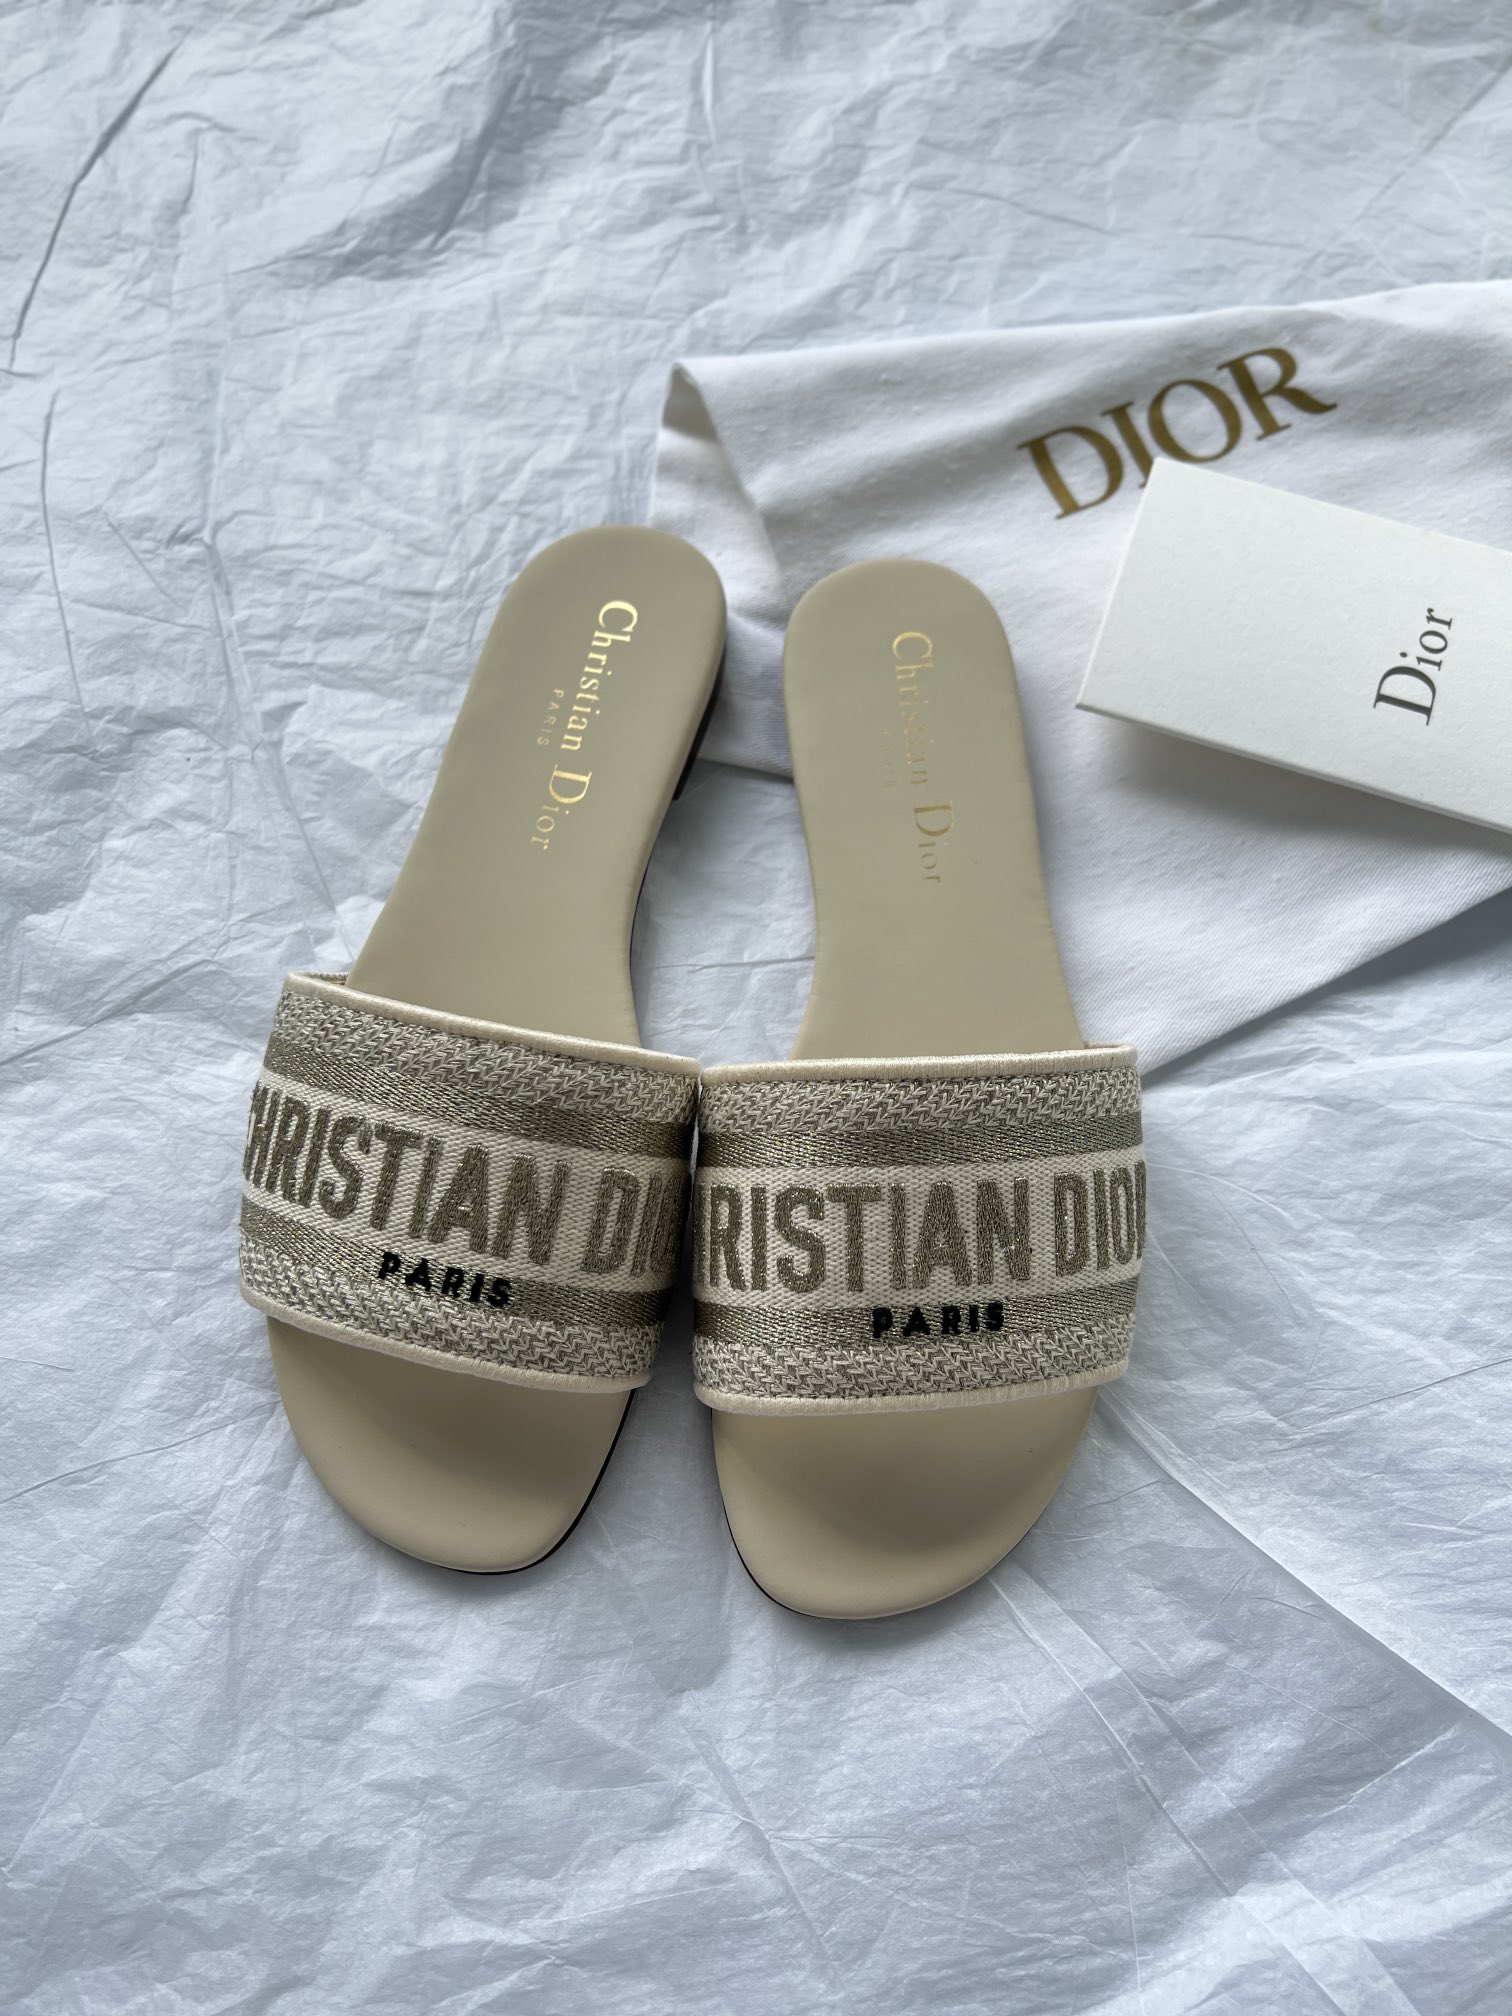 Replicas
 Dior Shoes Slippers Embroidery Cotton Cowhide Genuine Leather Spring/Summer Collection